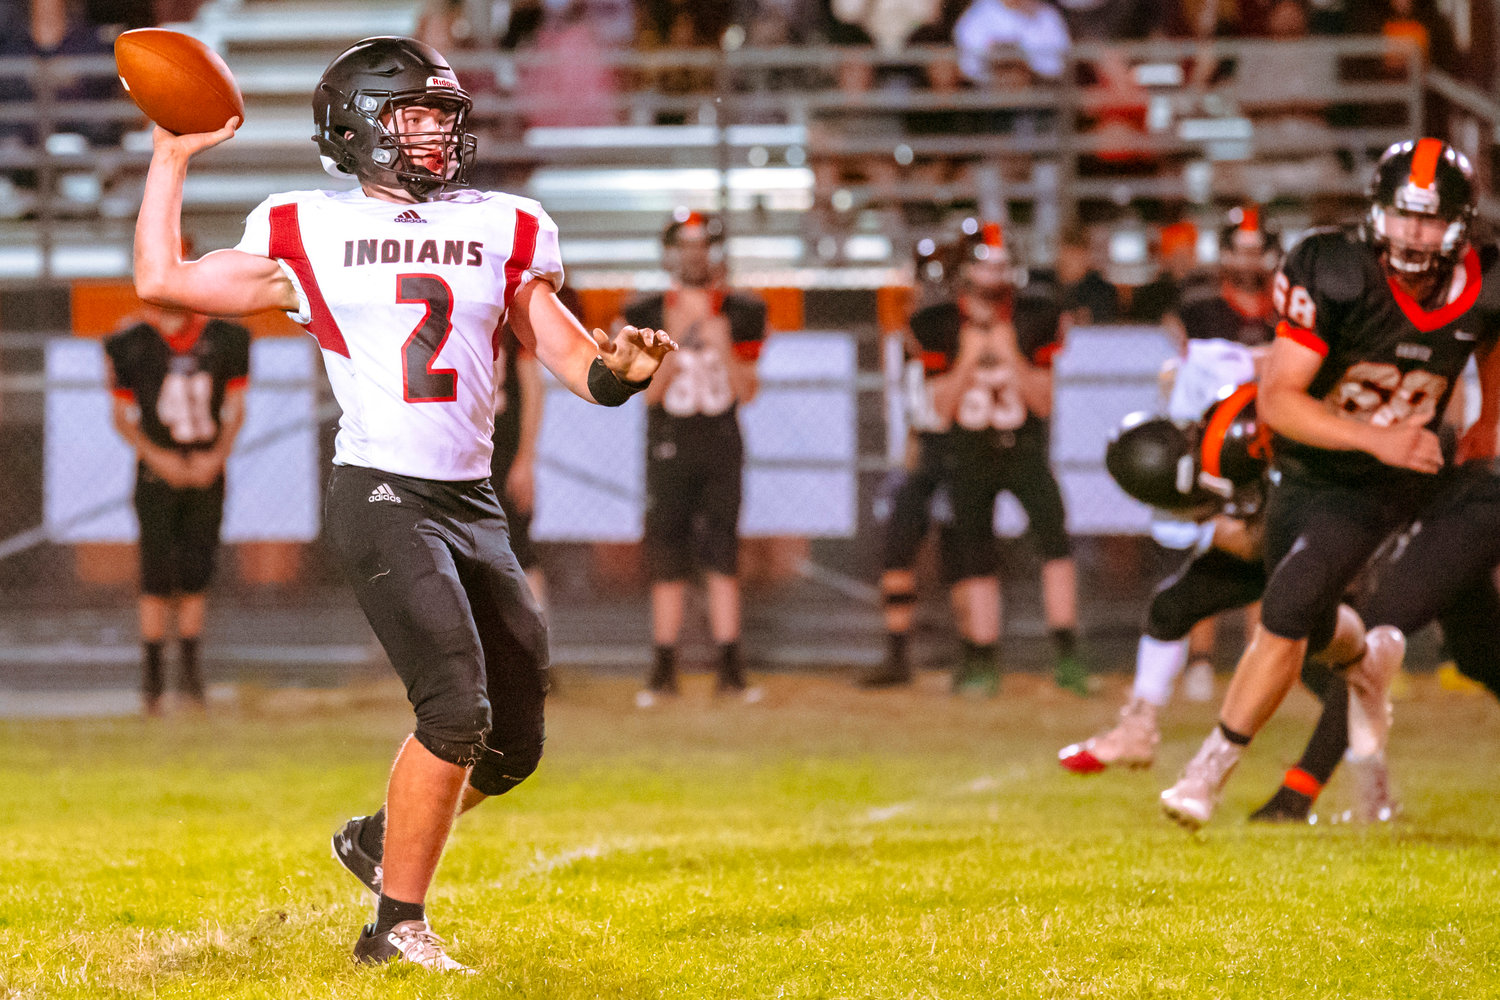 Toledo’s Wyatt Nef (2) looks to pass during a game against the Mountaineers Friday night at Rainier High School.